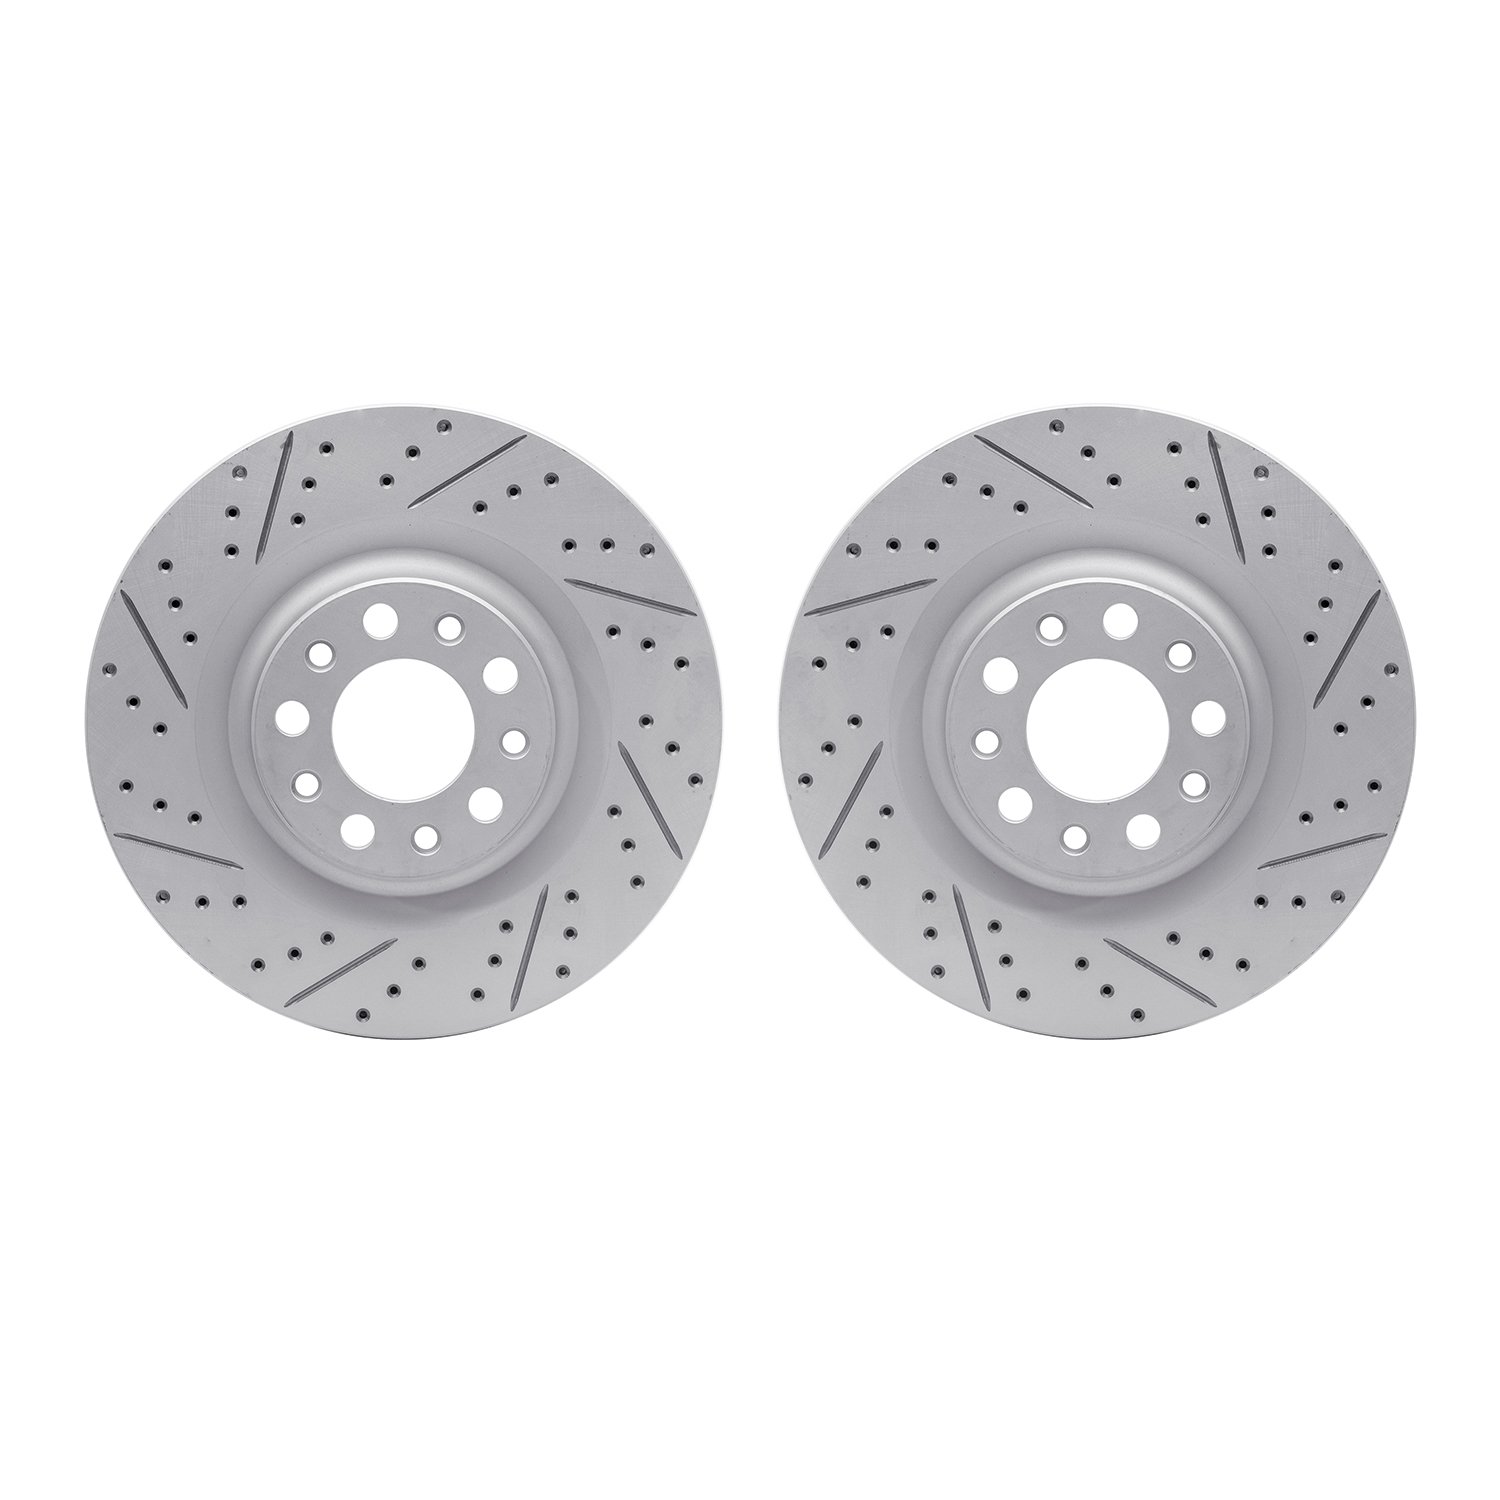 2002-16003 Geoperformance Drilled/Slotted Brake Rotors, Fits Select Alfa Romeo, Position: Rear